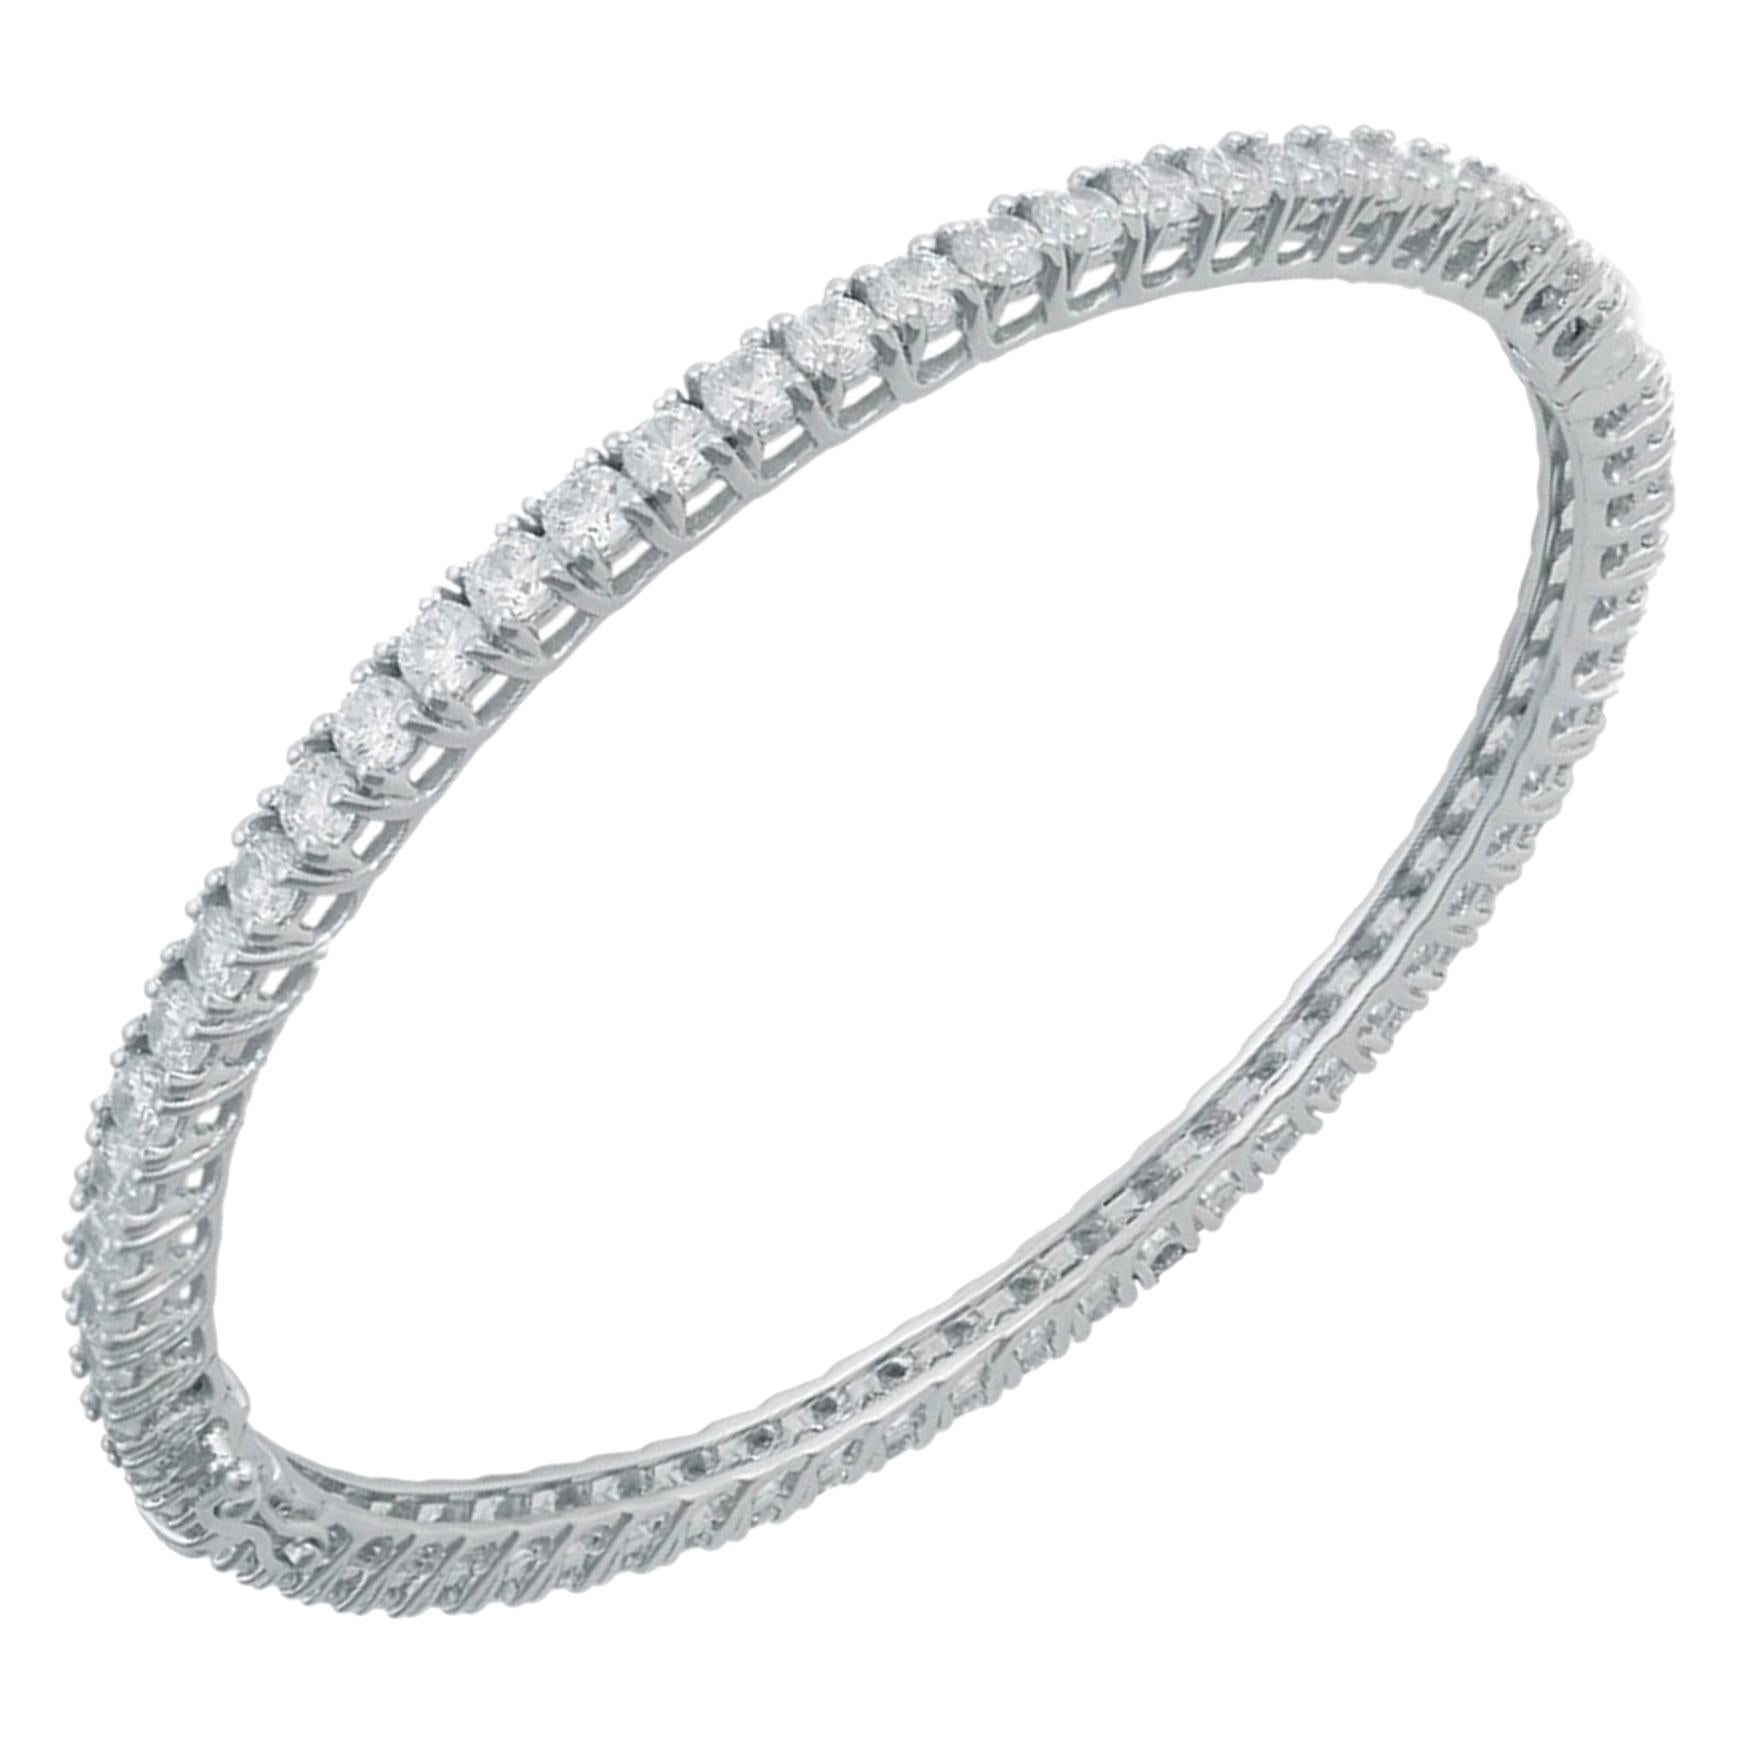 TJD 7.75 Carat Round Diamond 18K White Gold Classis Full Eternity Hinged Bangle For Sale